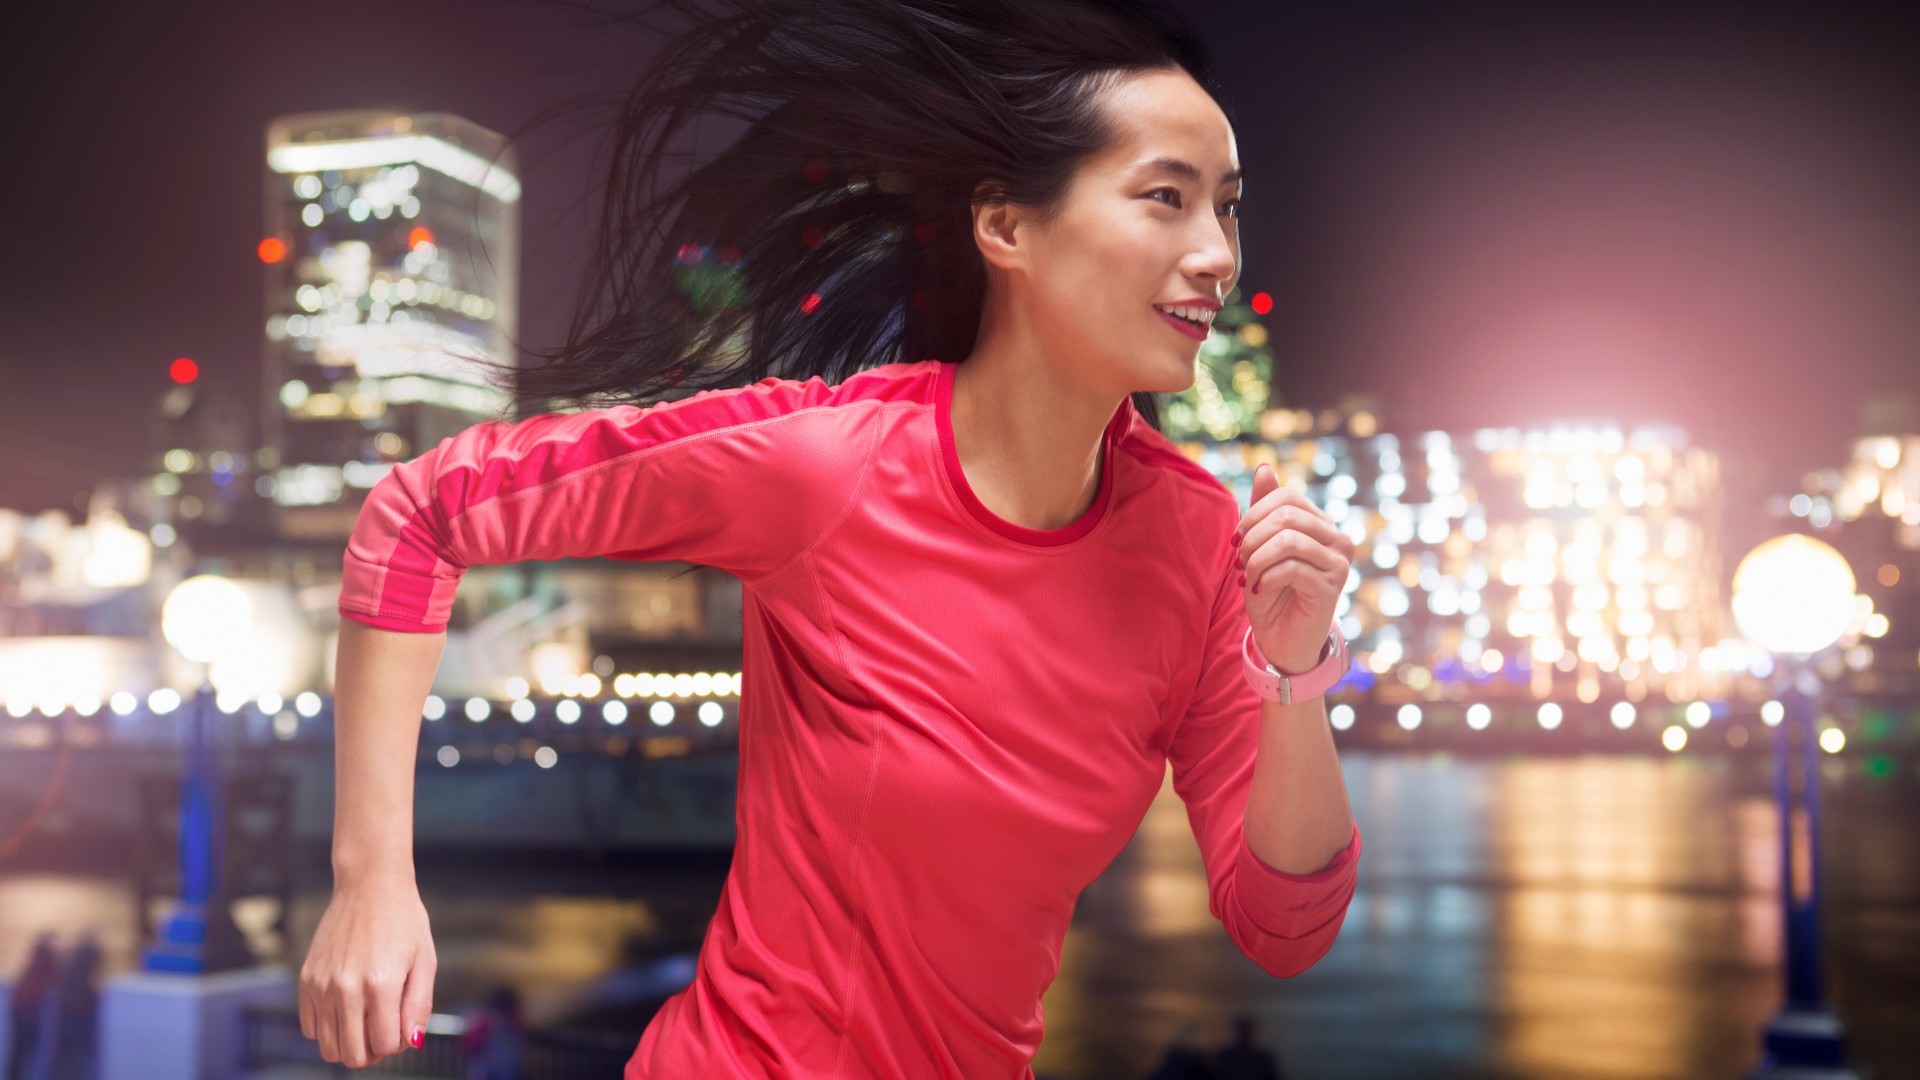 Running at night: How does it